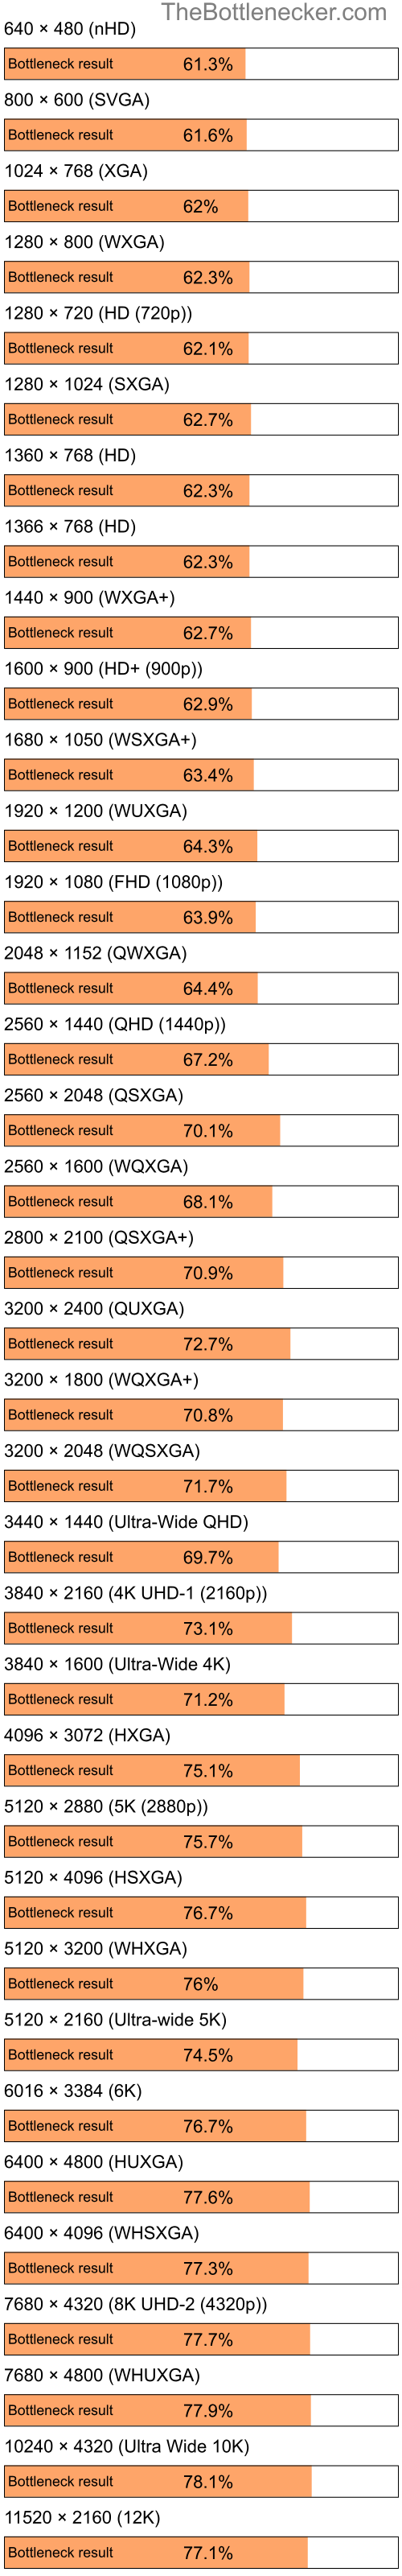 Bottleneck results by resolution for Intel Celeron M and AMD Mobility Radeon HD 2400 XT in General Tasks